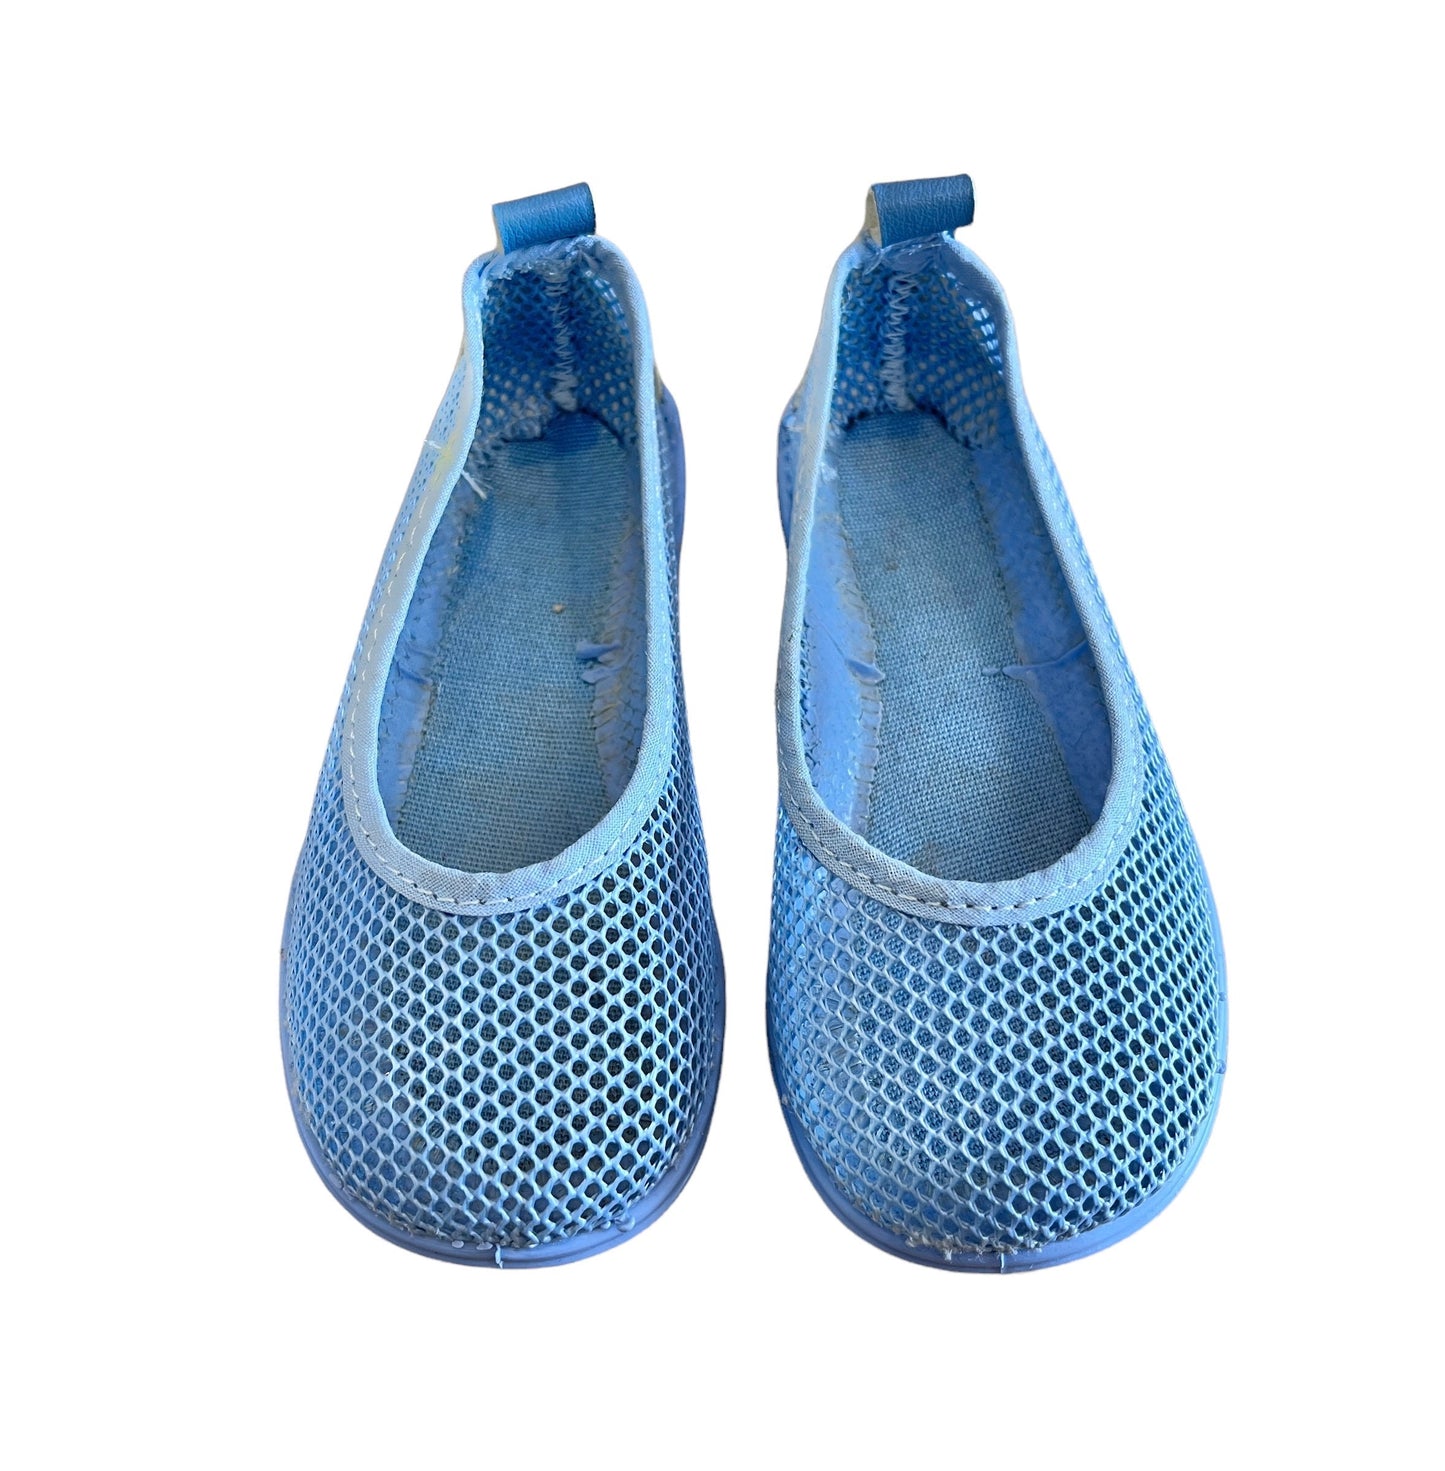 Vintage 1970's Baby / Toddler Blue Mesh Shoes  Made in France EU 23